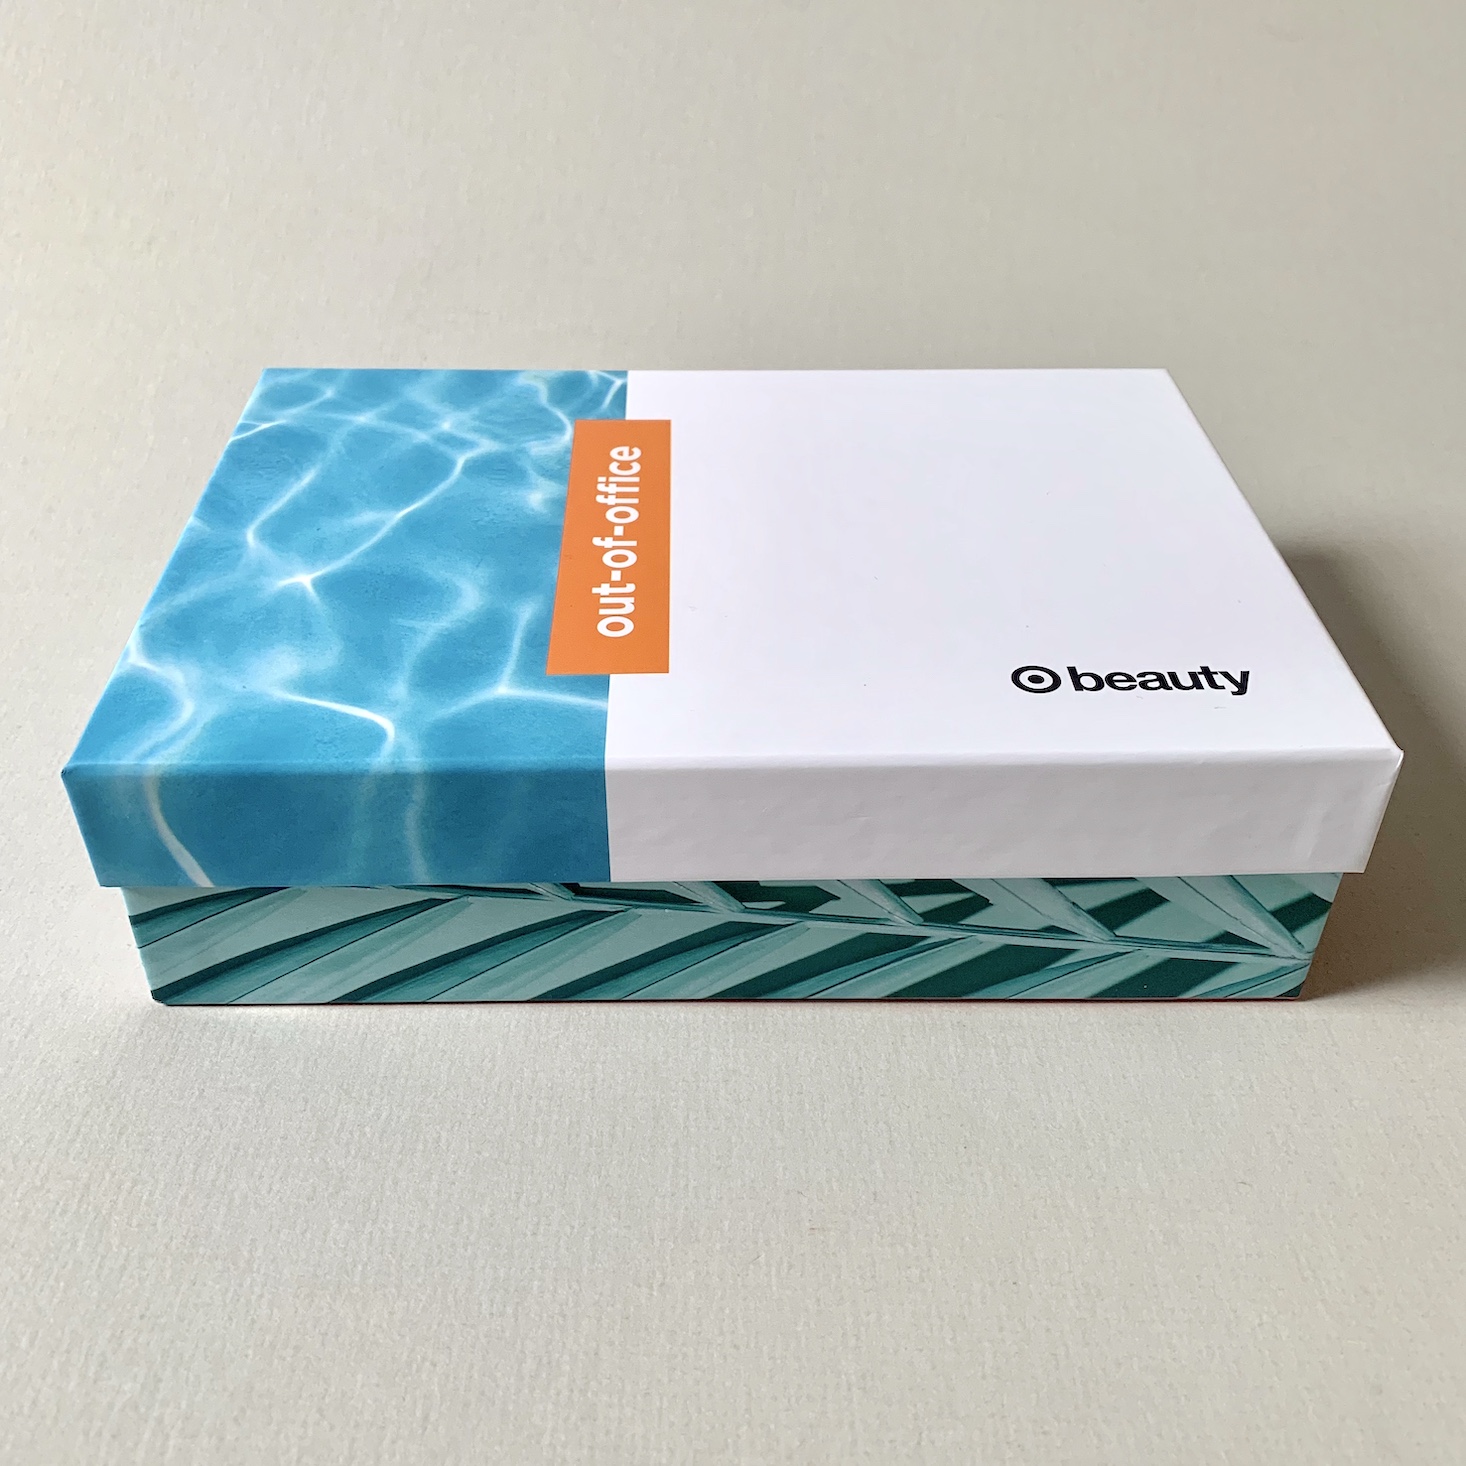 Target Beauty Box “Spring Break” Review – March 2020